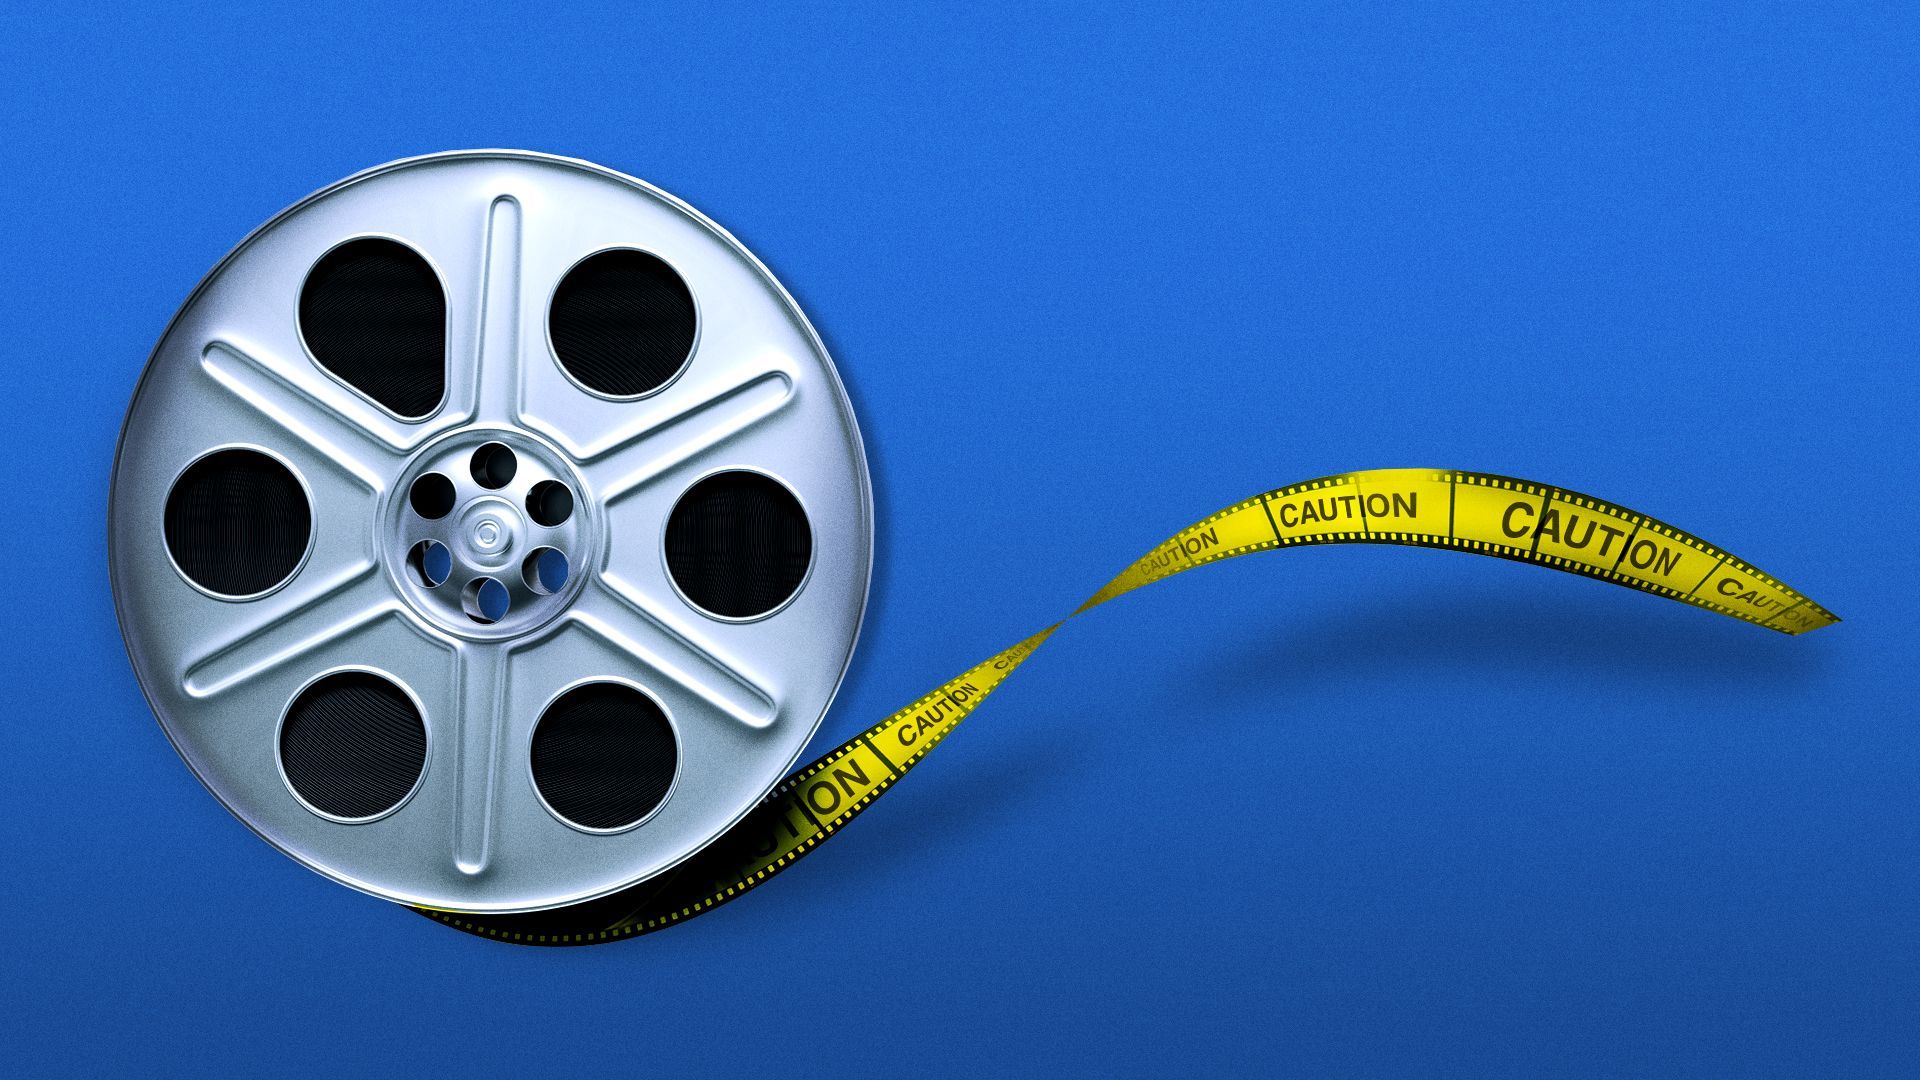 Illustration of a film reel filled with police caution tape.